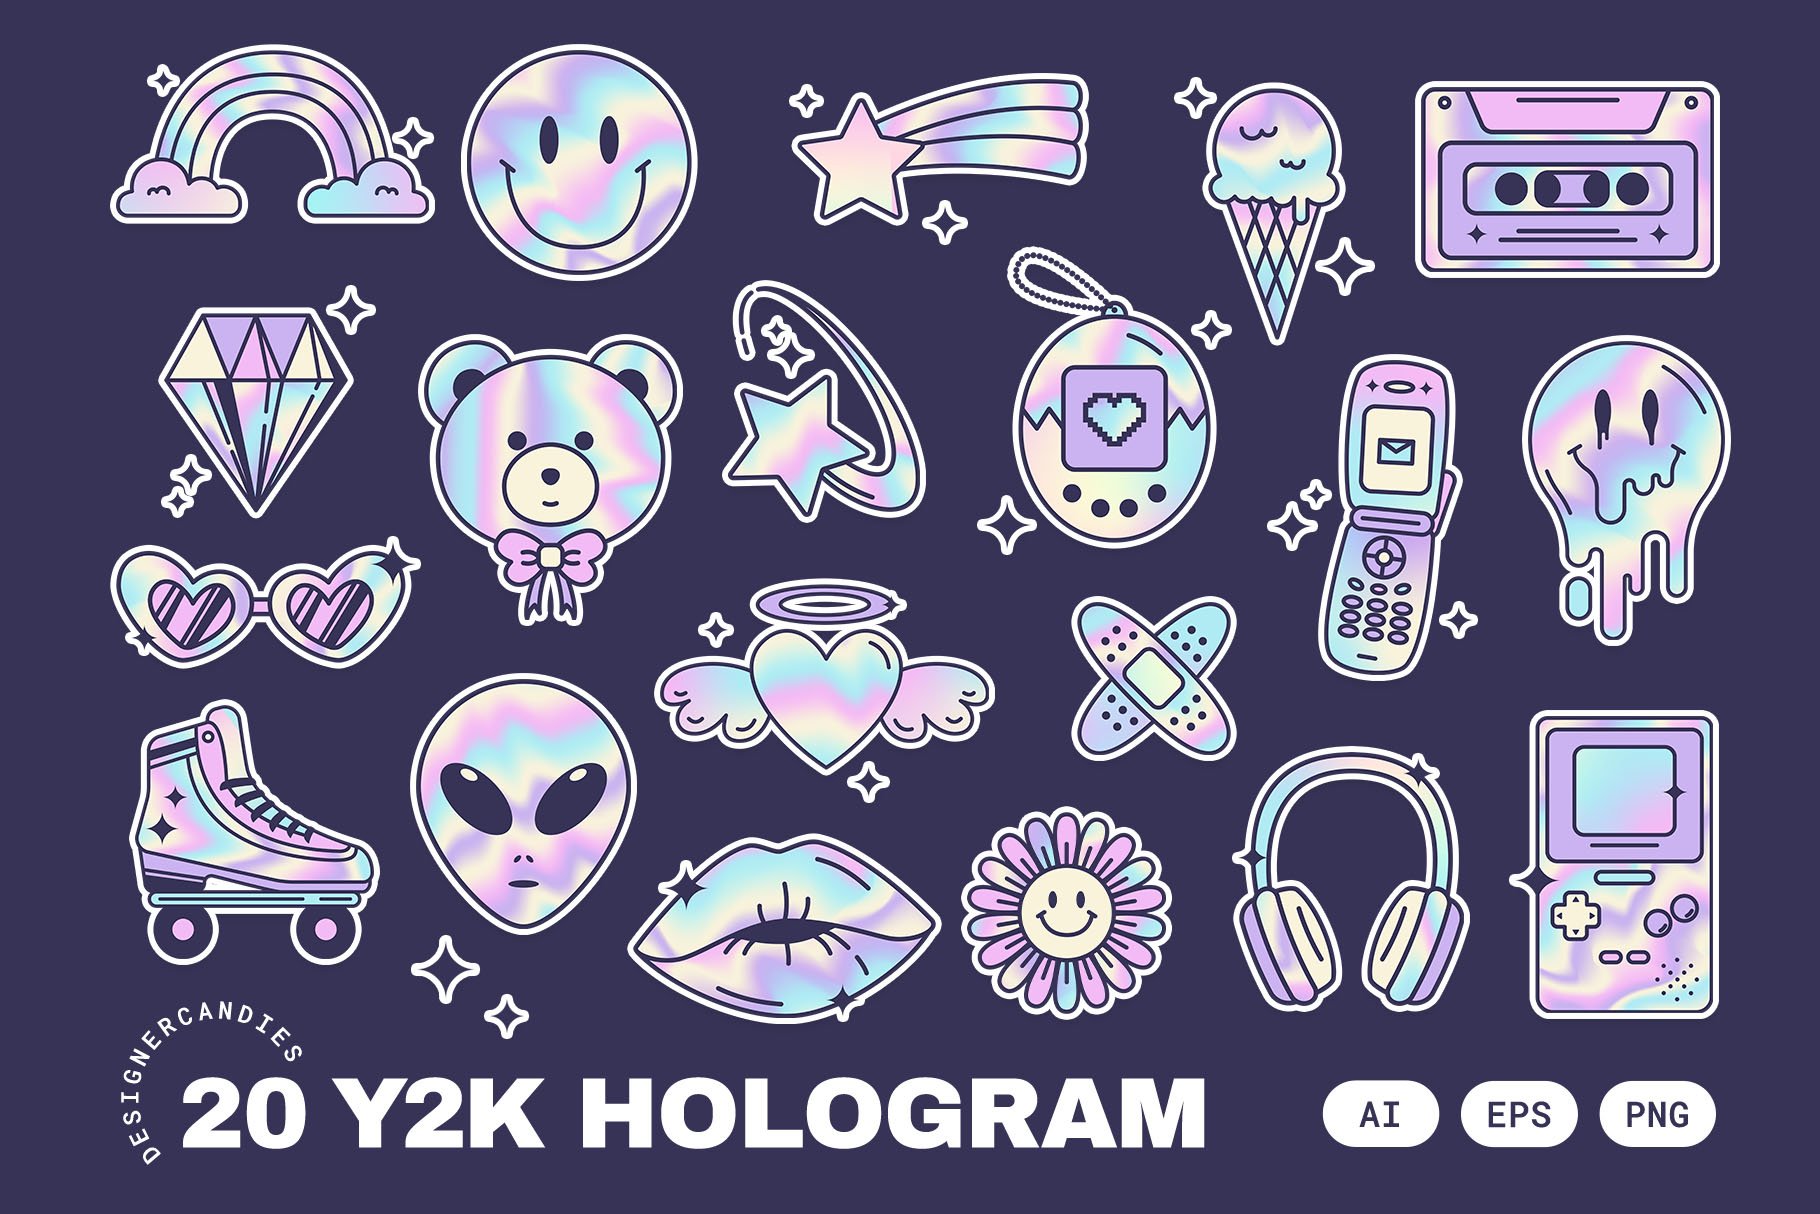 Y2K Holographic Stickers Illustrations Set